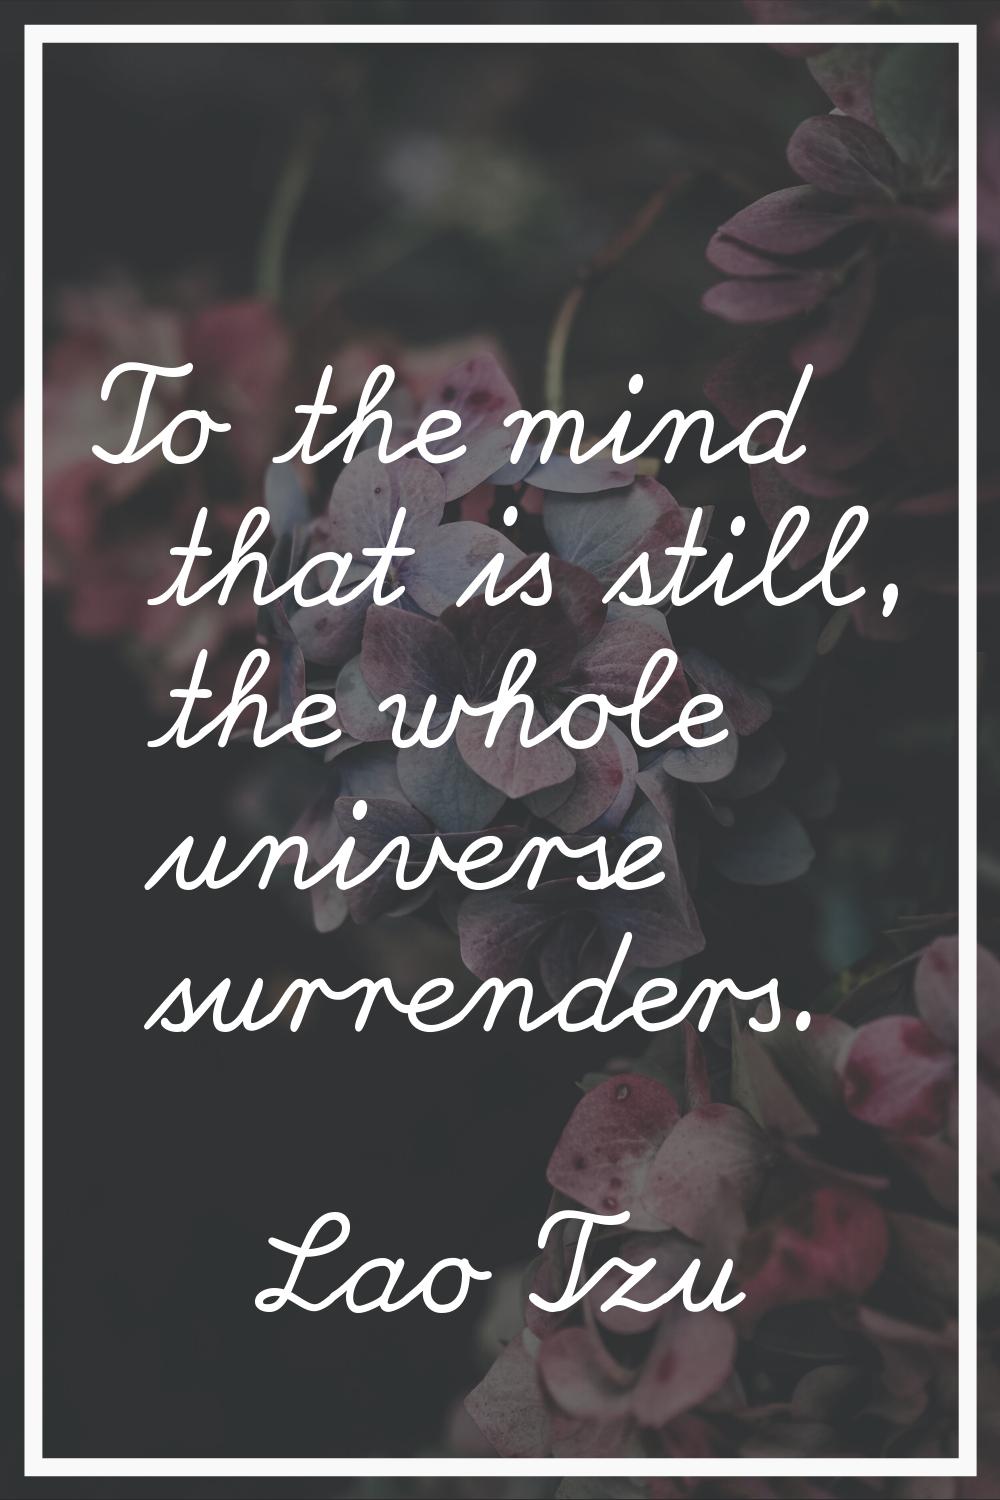 To the mind that is still, the whole universe surrenders.